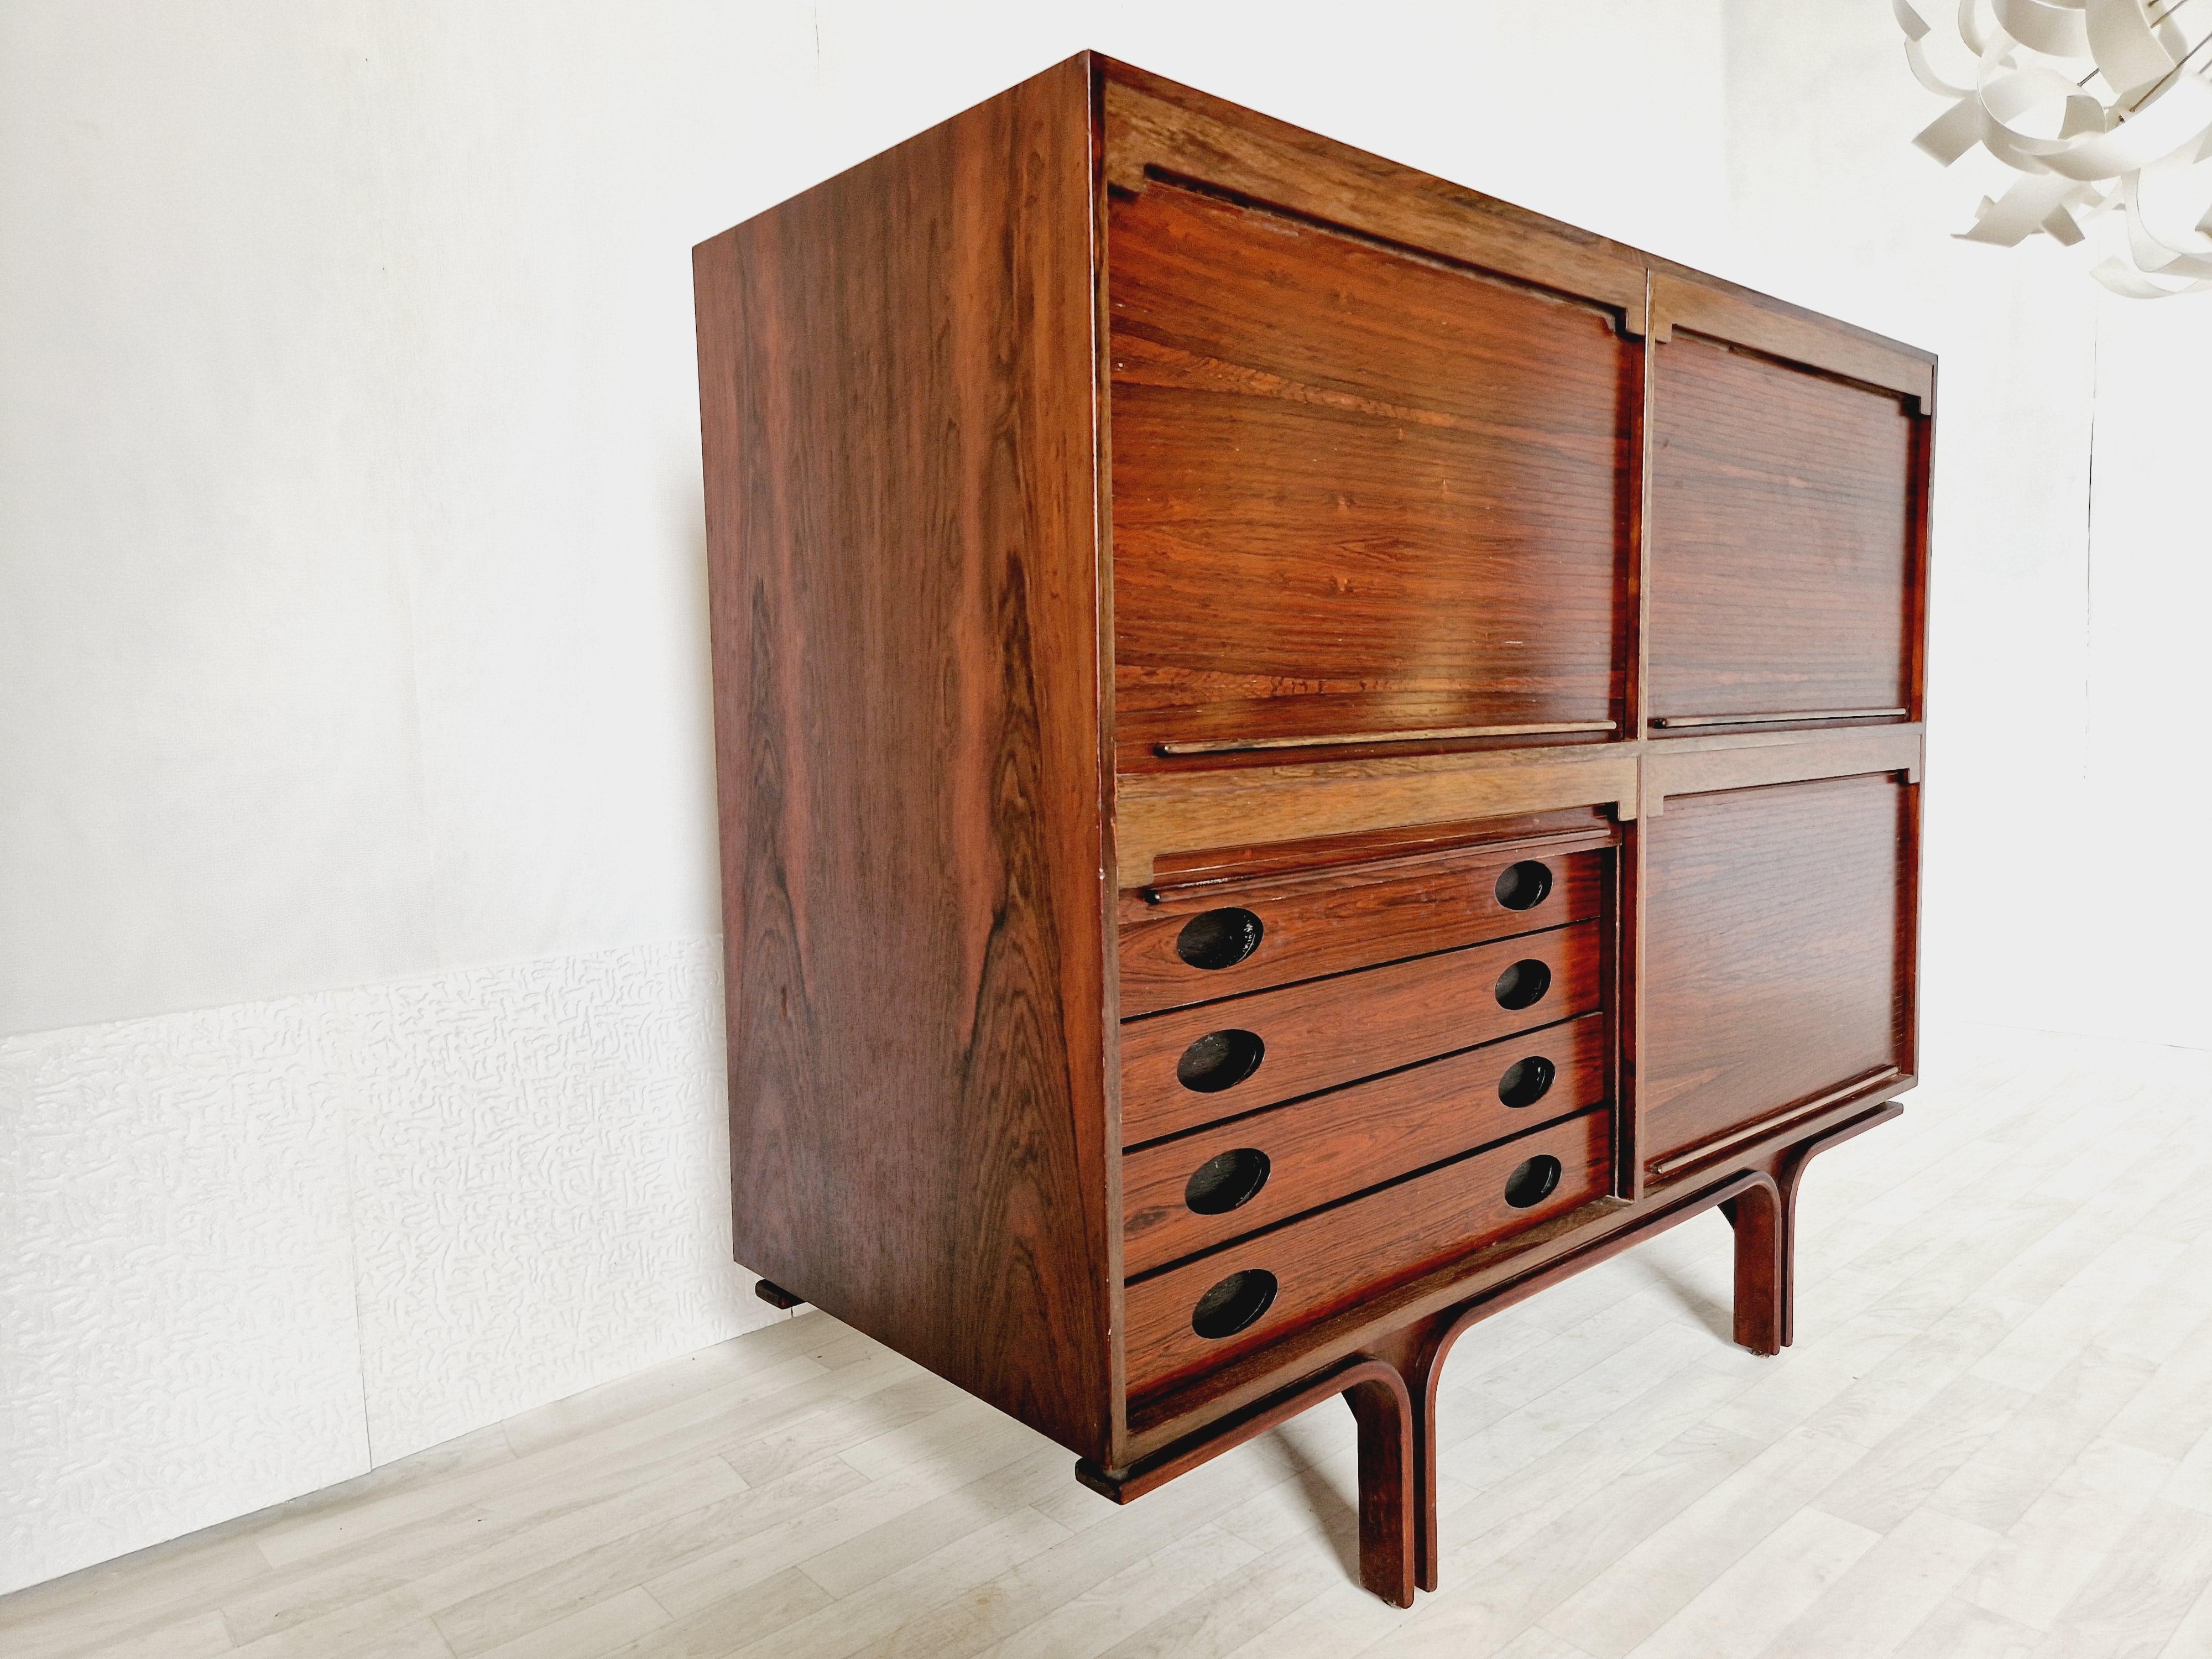 
This stunning vintage sideboard is a true statement piece for any room. It has a beautiful Rosewood finish and smooth features, with cup handles that add a touch of mid-century modern style. There are three compartments with shelves and one with 4